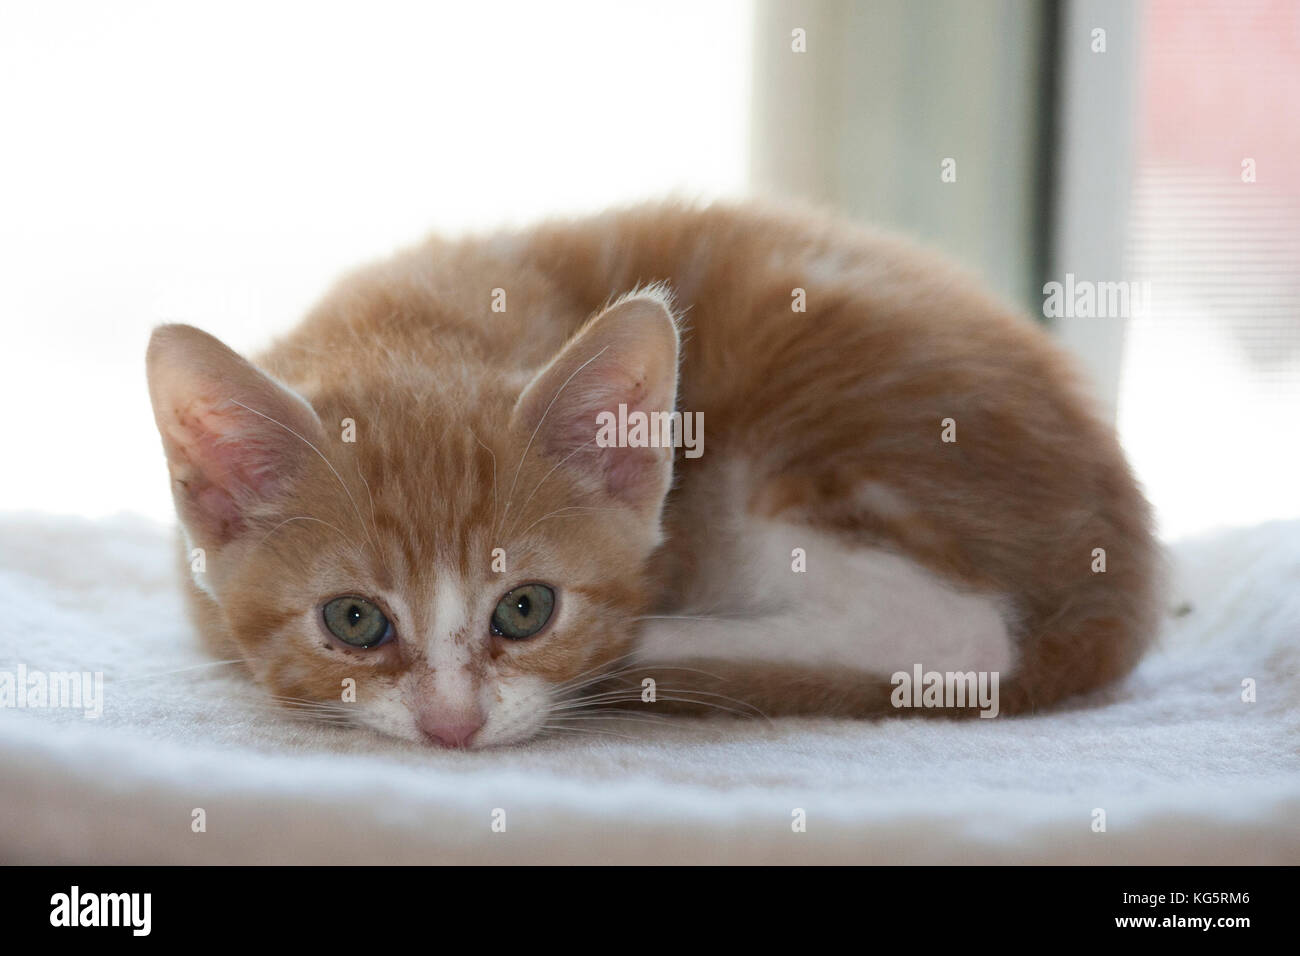 Foster kitten recovering from eye infection curled up. Stock Photo